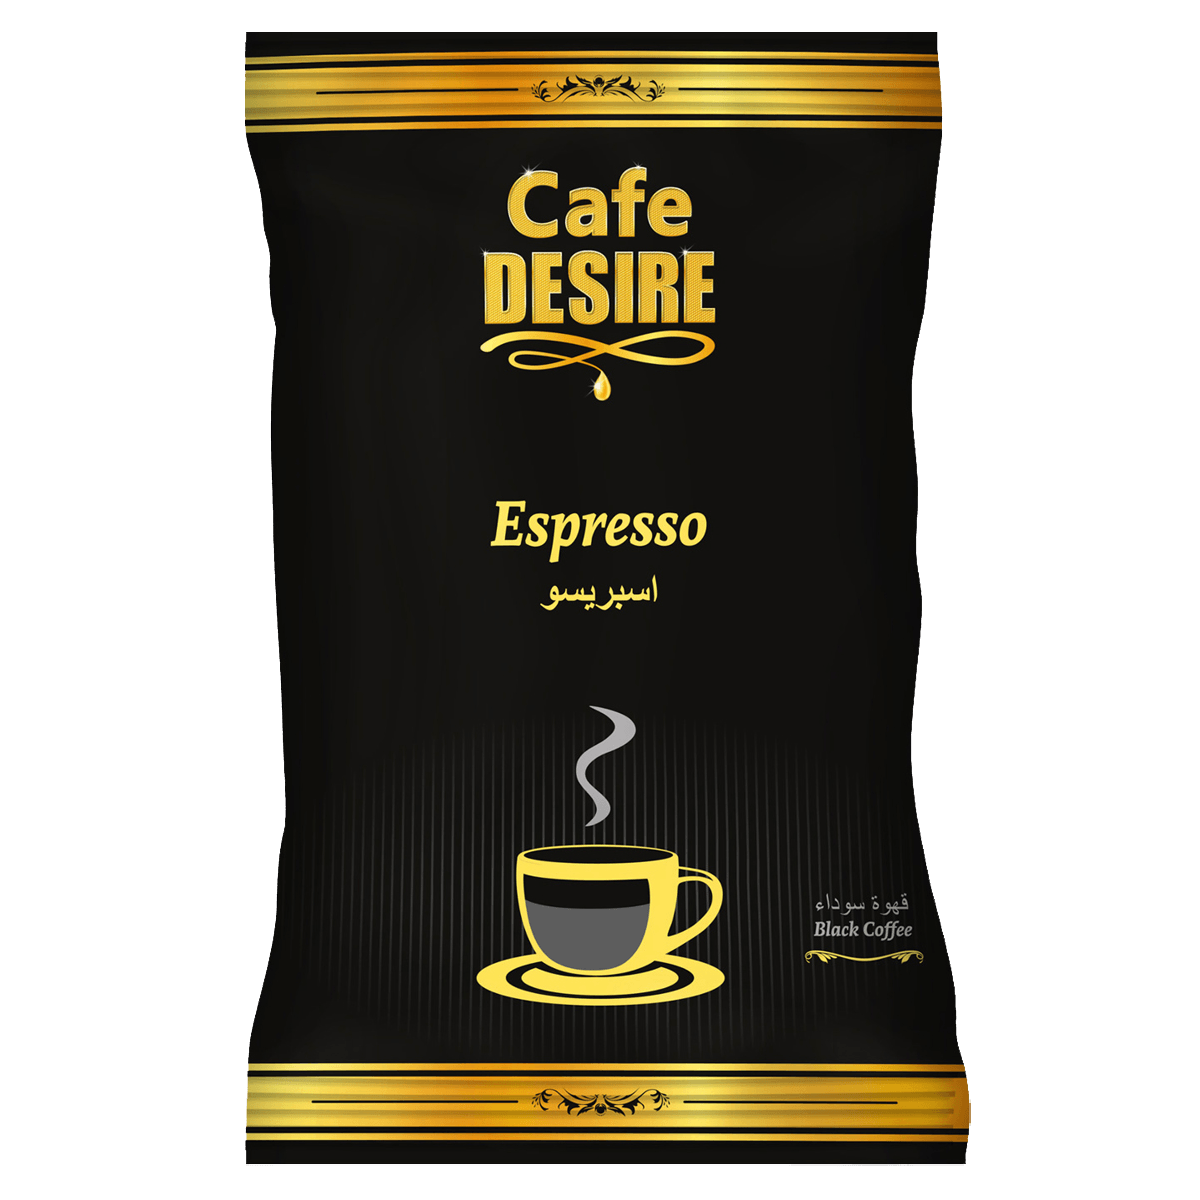 Espresso Black Coffee (500g) | For Manual Use - Just add Hot Water | Suitable for all Vending Machines - Cafe Desire Cafe Desire Cafe Desire Espresso Black Coffee (500g) | For Manual Use - Just add Hot Water | Suitable for all Vending Machines